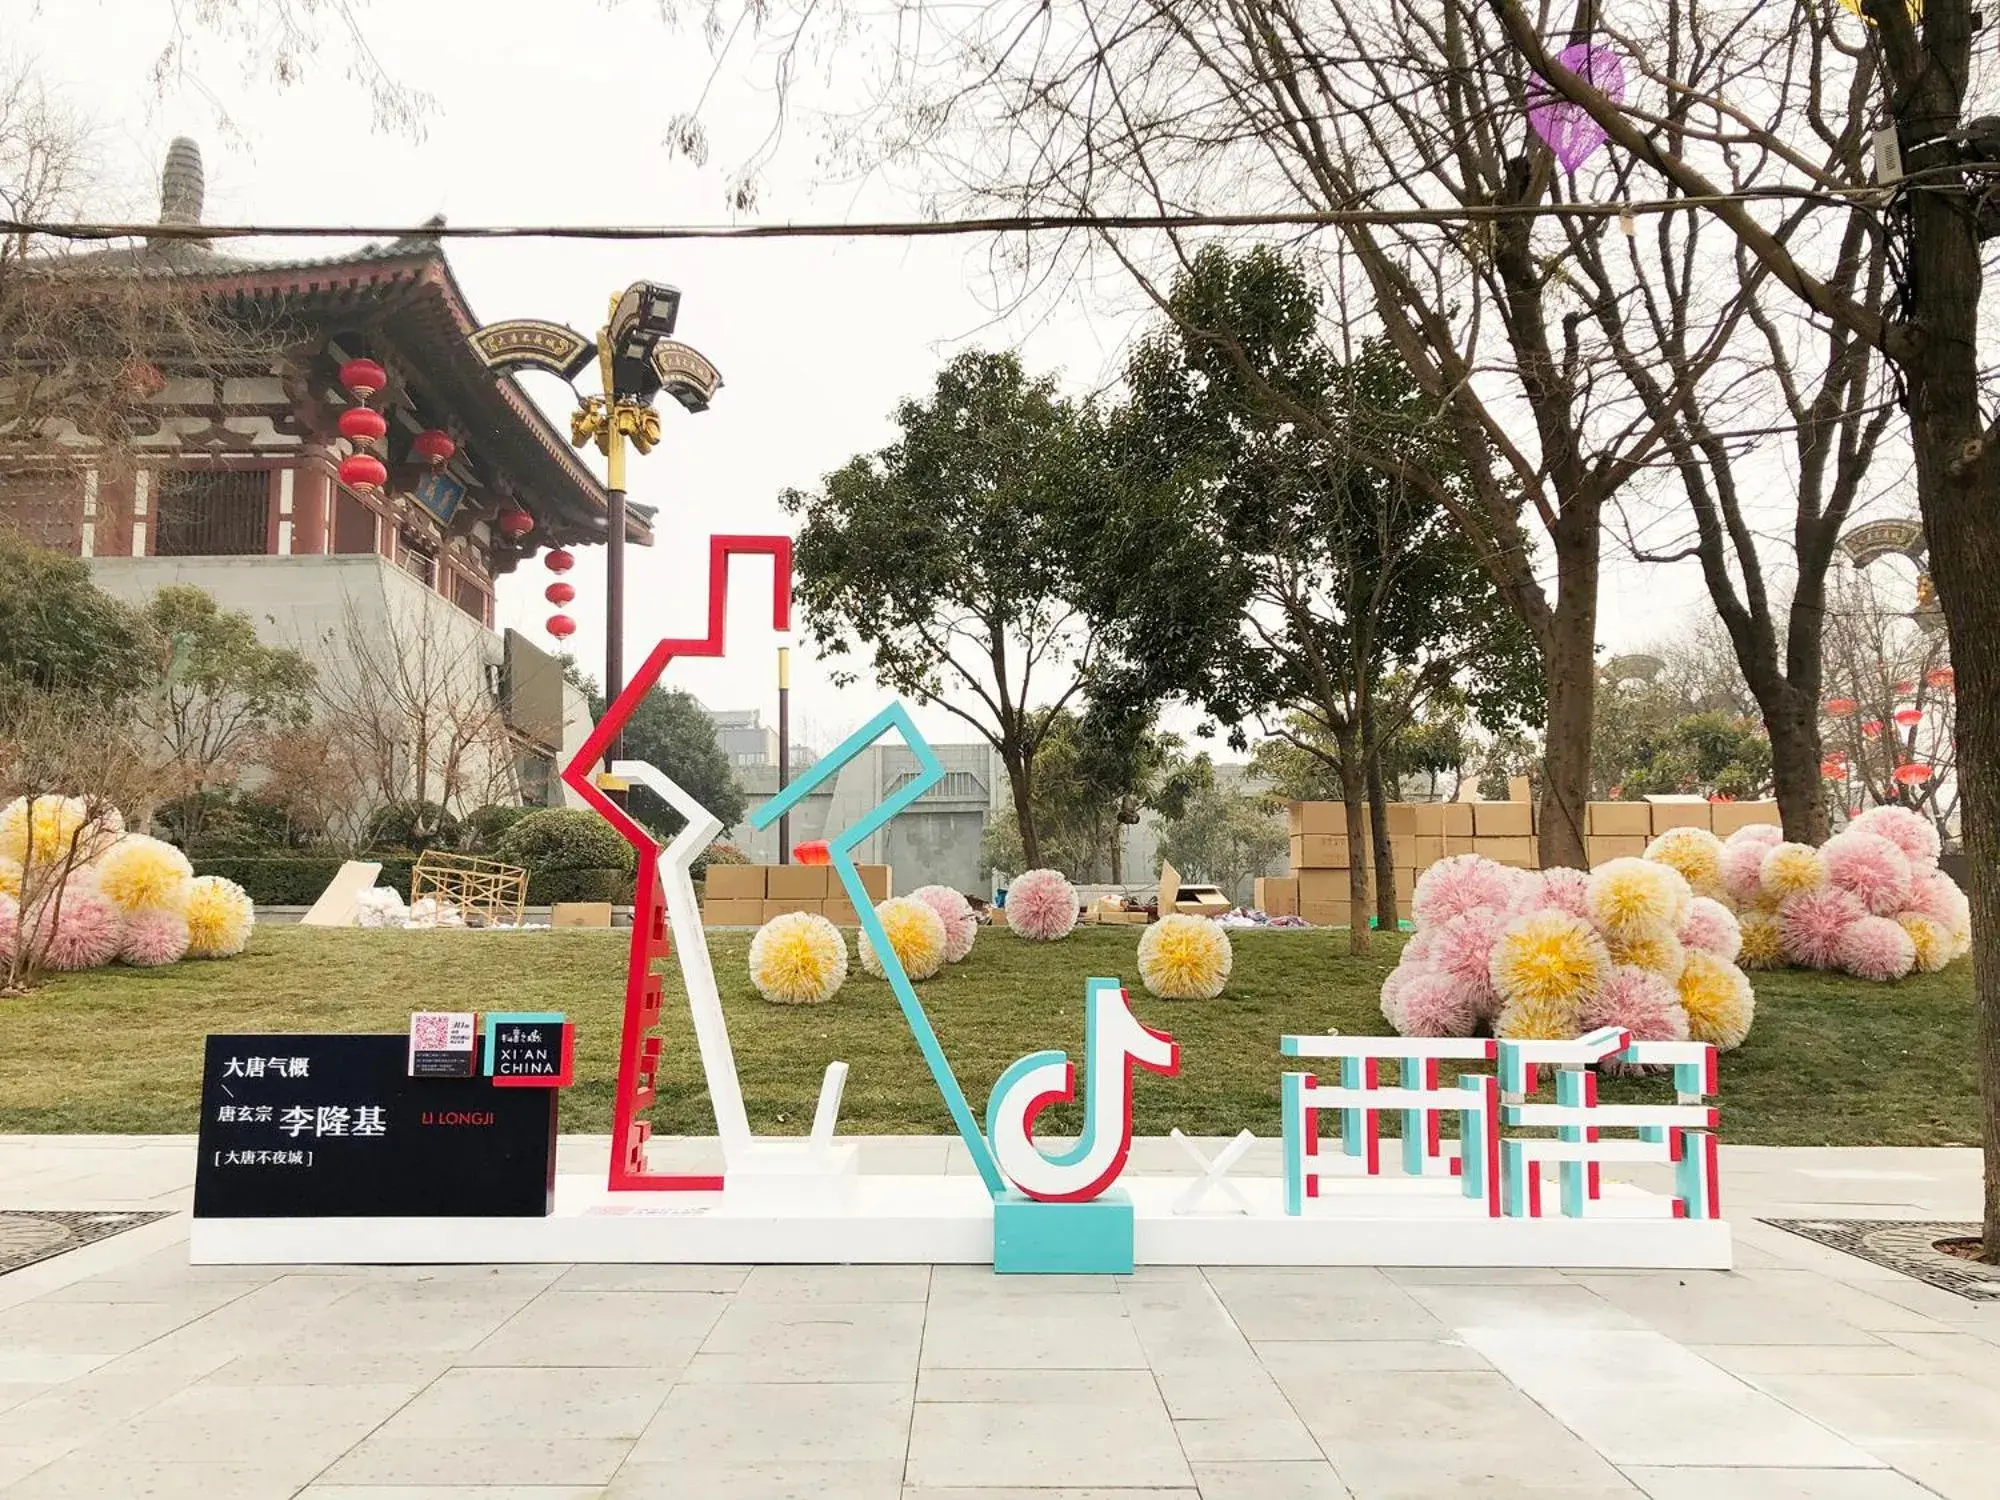 Nearby landmark, Children's Play Area in Wyndham Grand Xi'an South